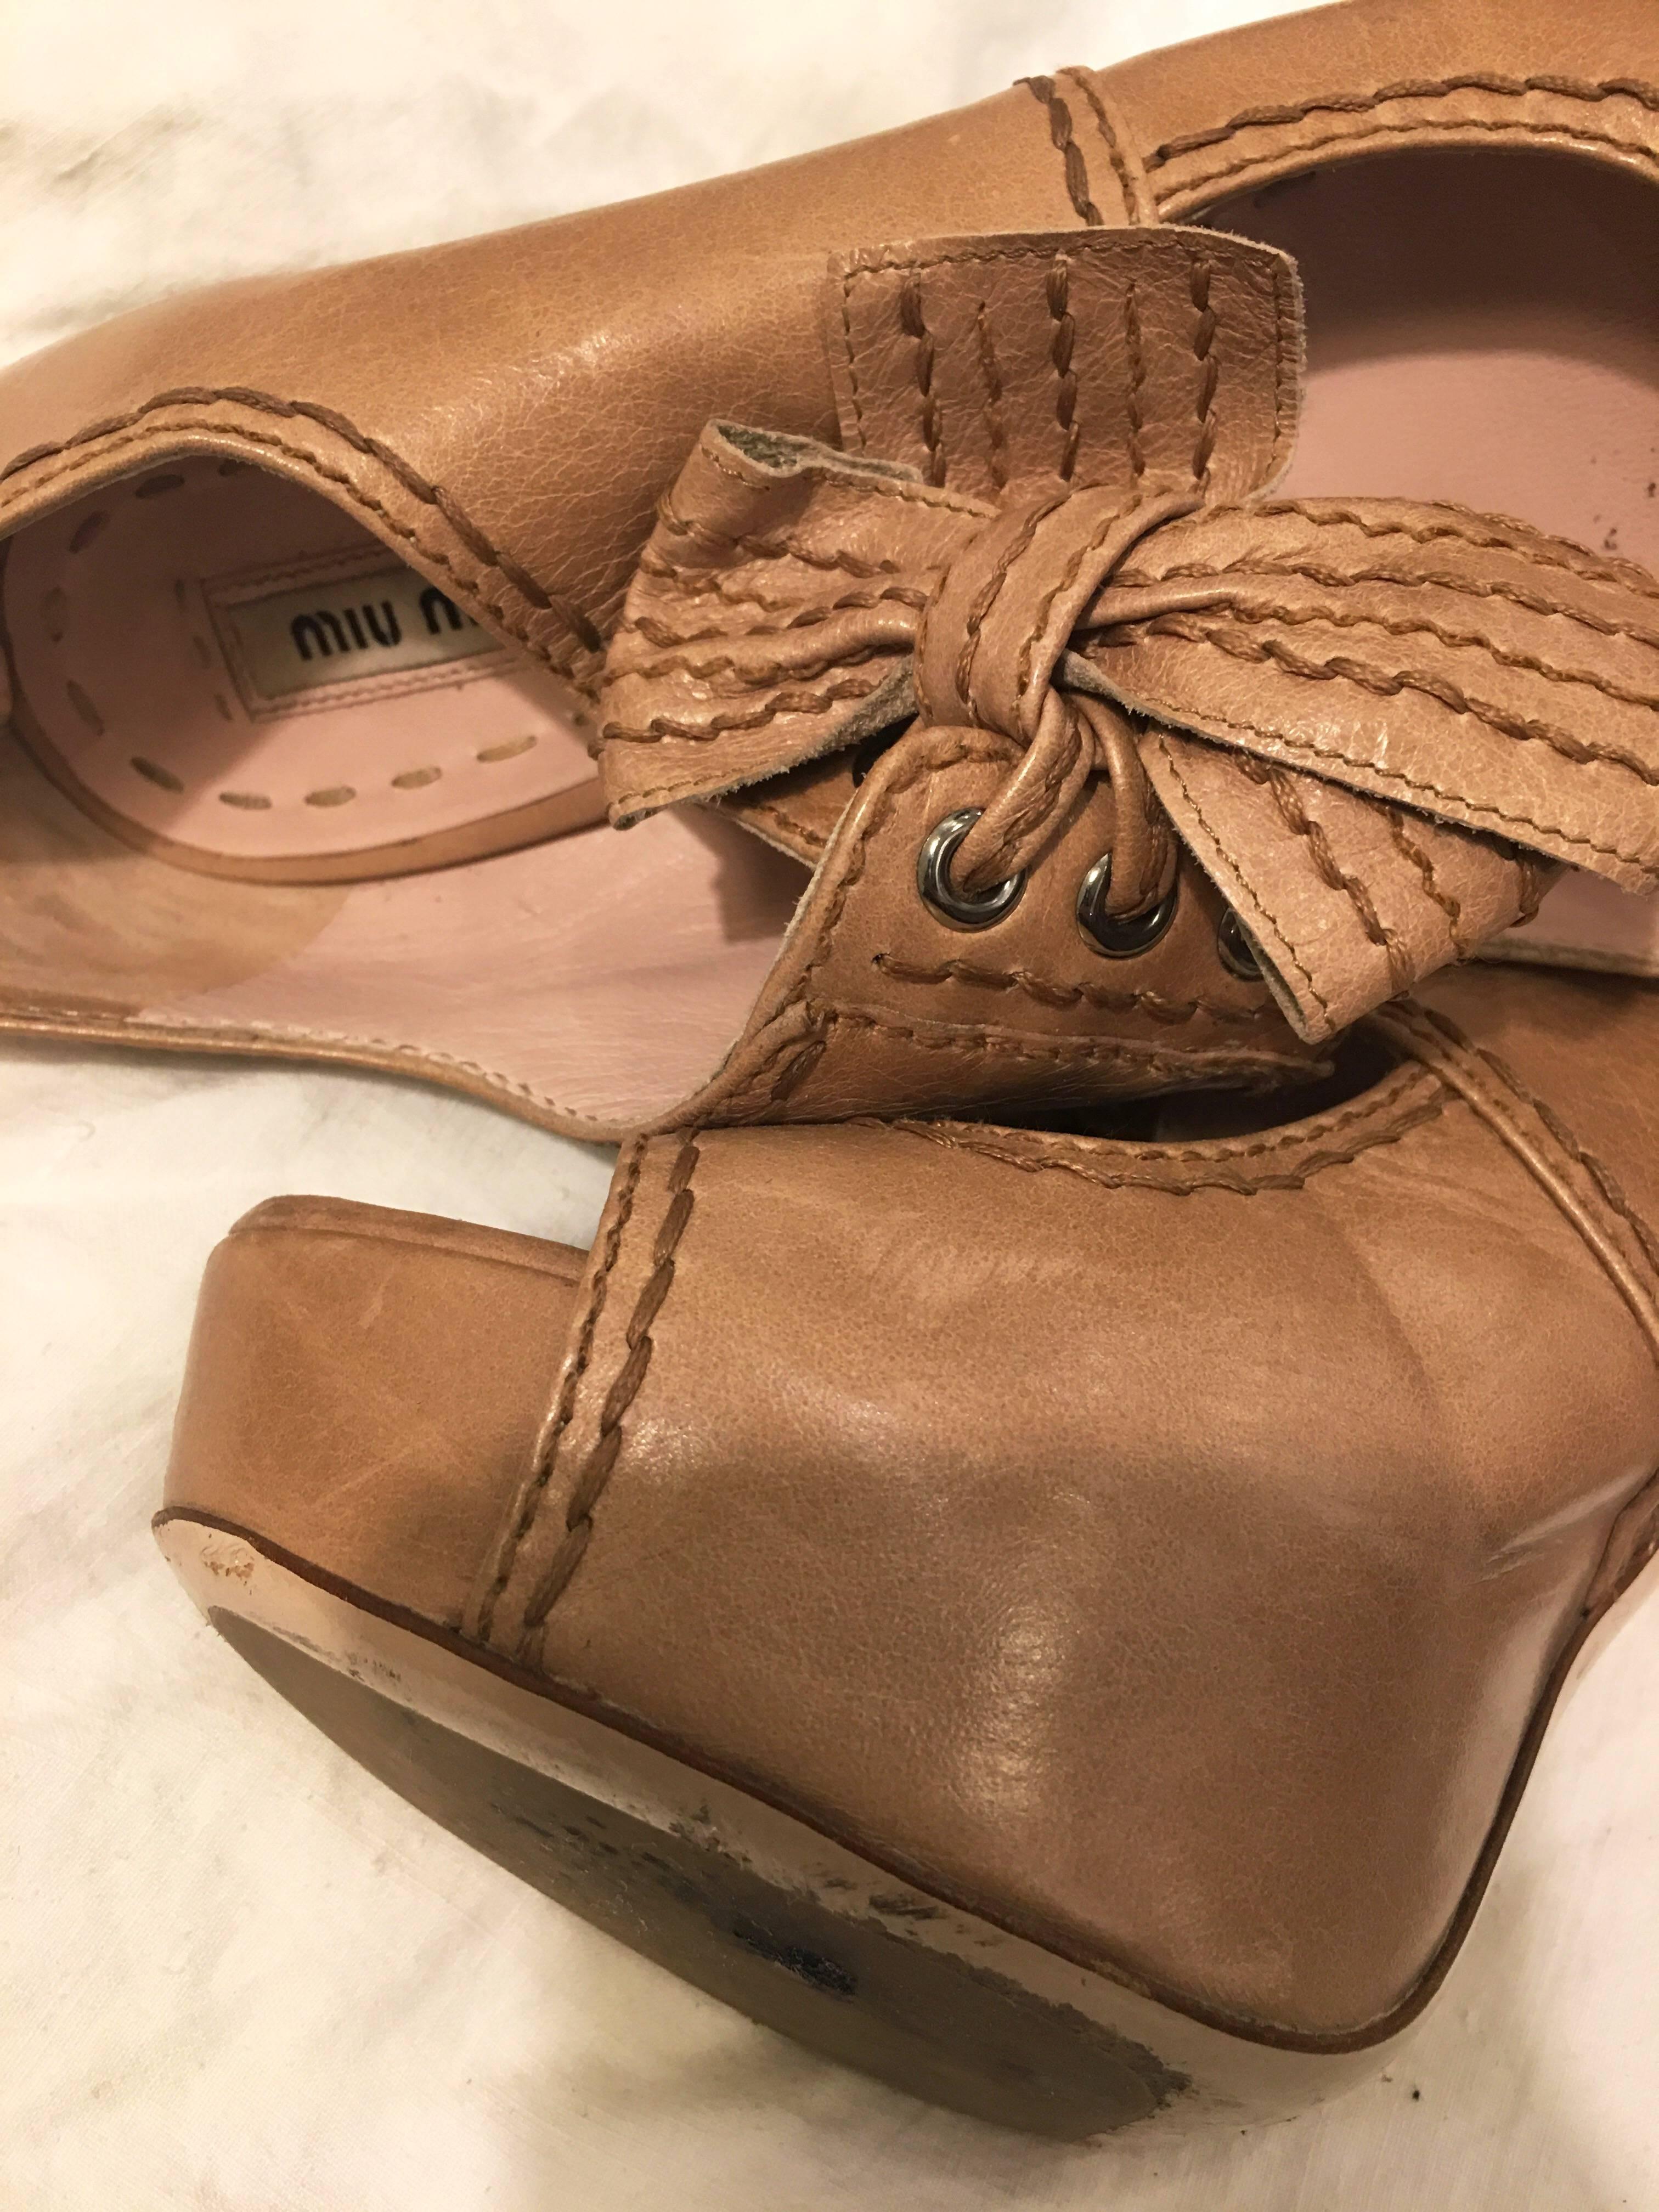 Beige Miu Miu open toe Mary Jane style pumps. Wooden stacked heels with leather laces up the front. Exposed brown stitching throughout. Zip up the back. Stamped on the bottom on the leather sole with the Miu Miu logo. 2 inch platform at toe of the